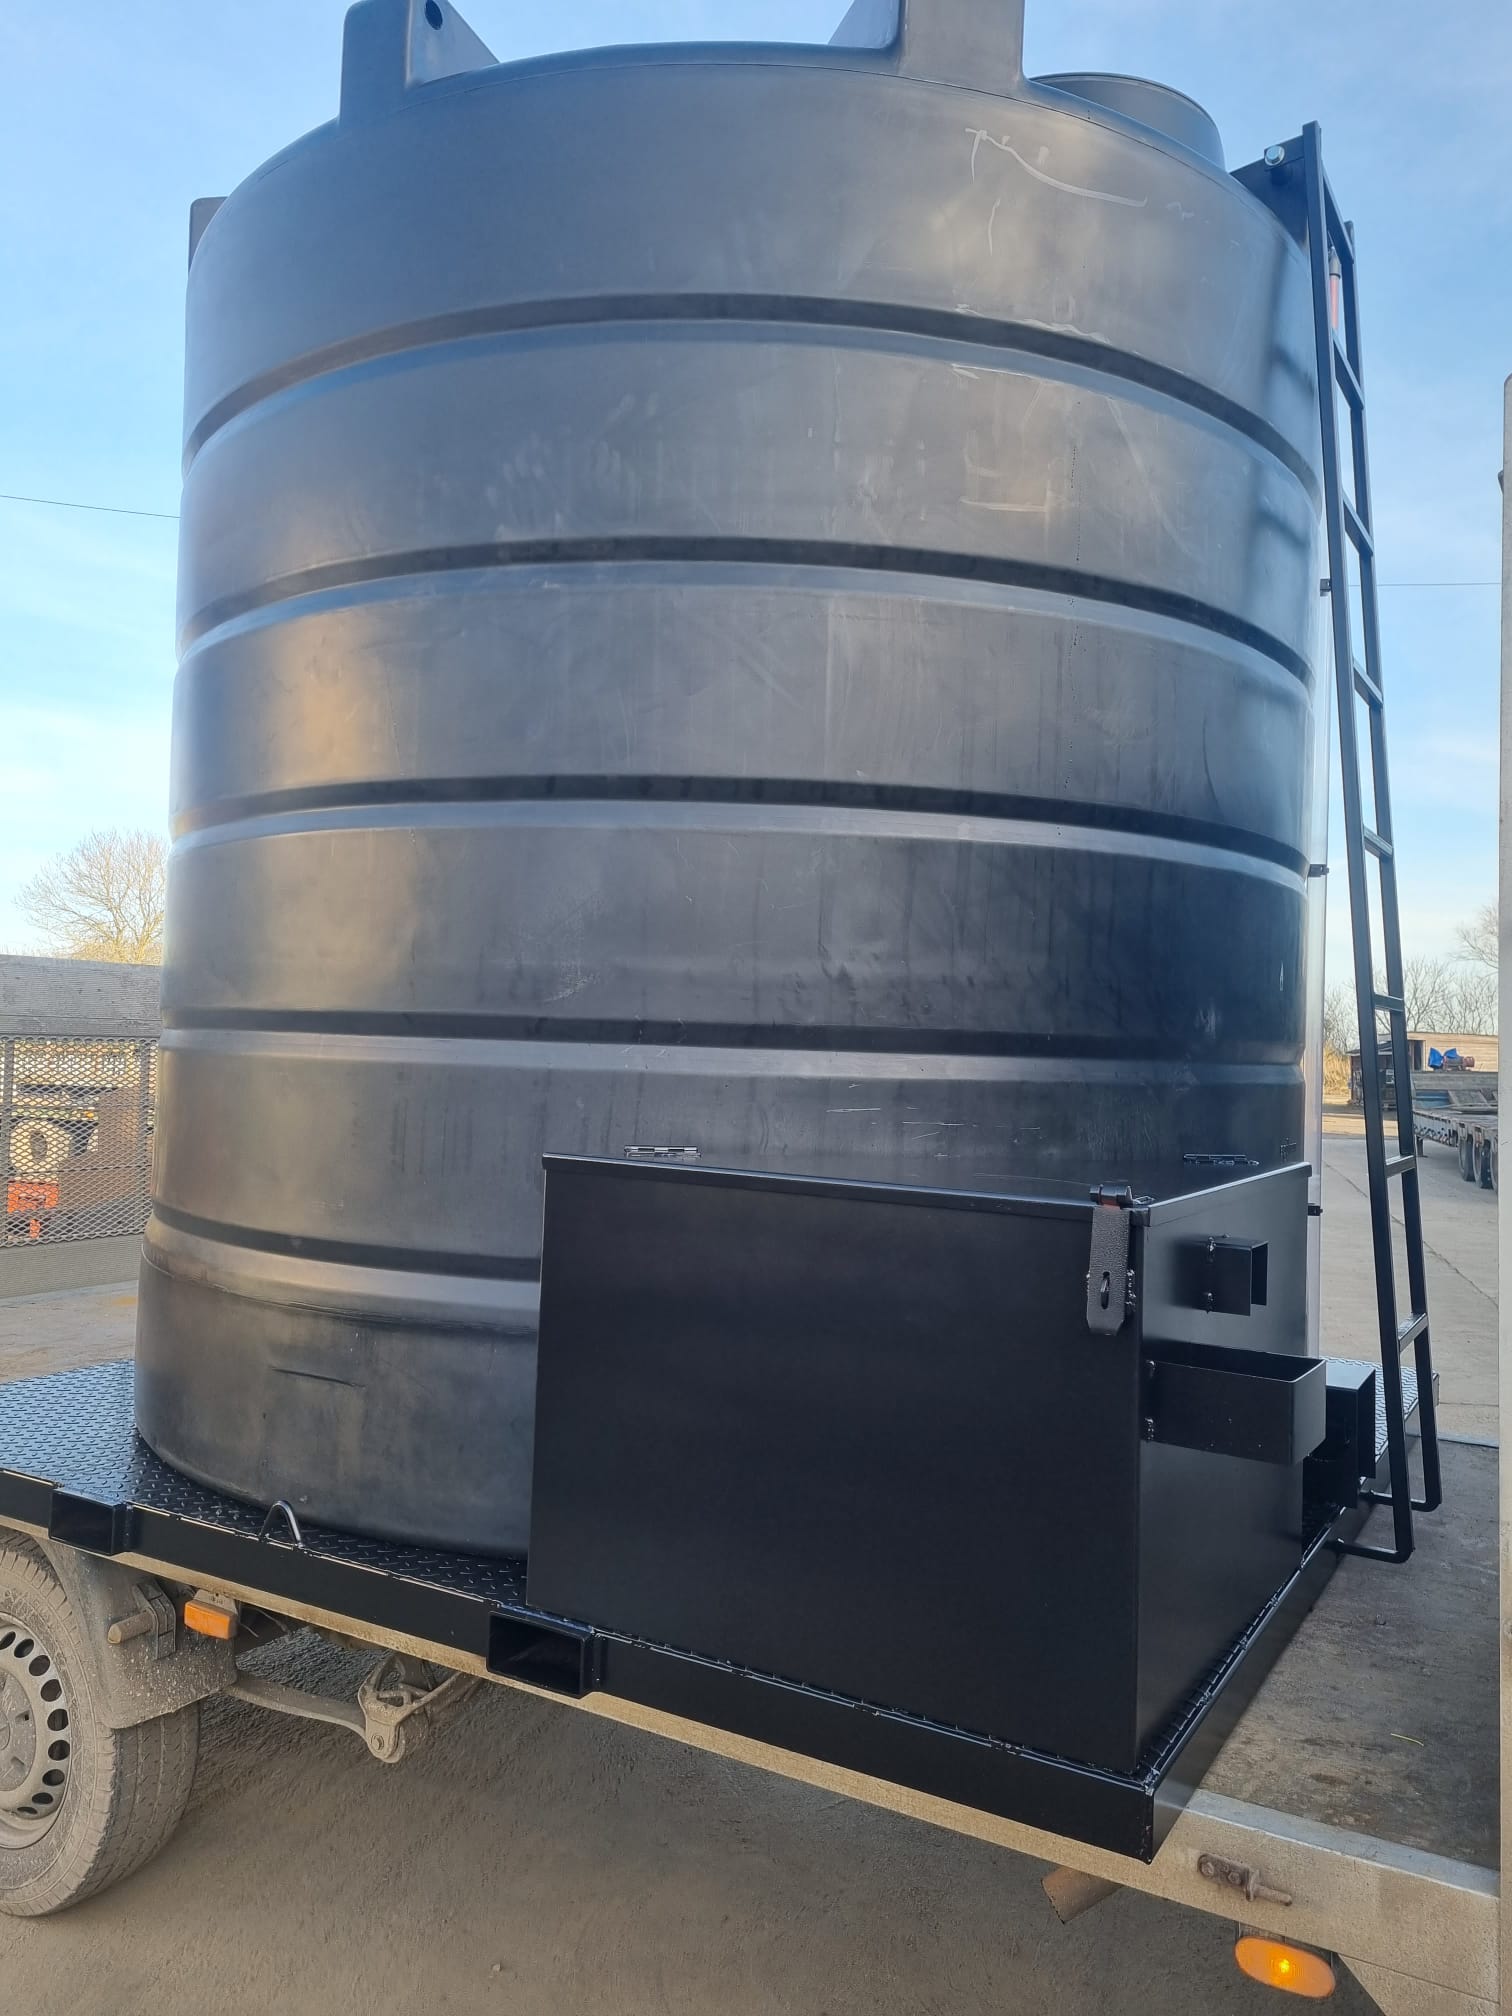 10,000ltr Water Tank, With On Demand Pump To Hire In Boston